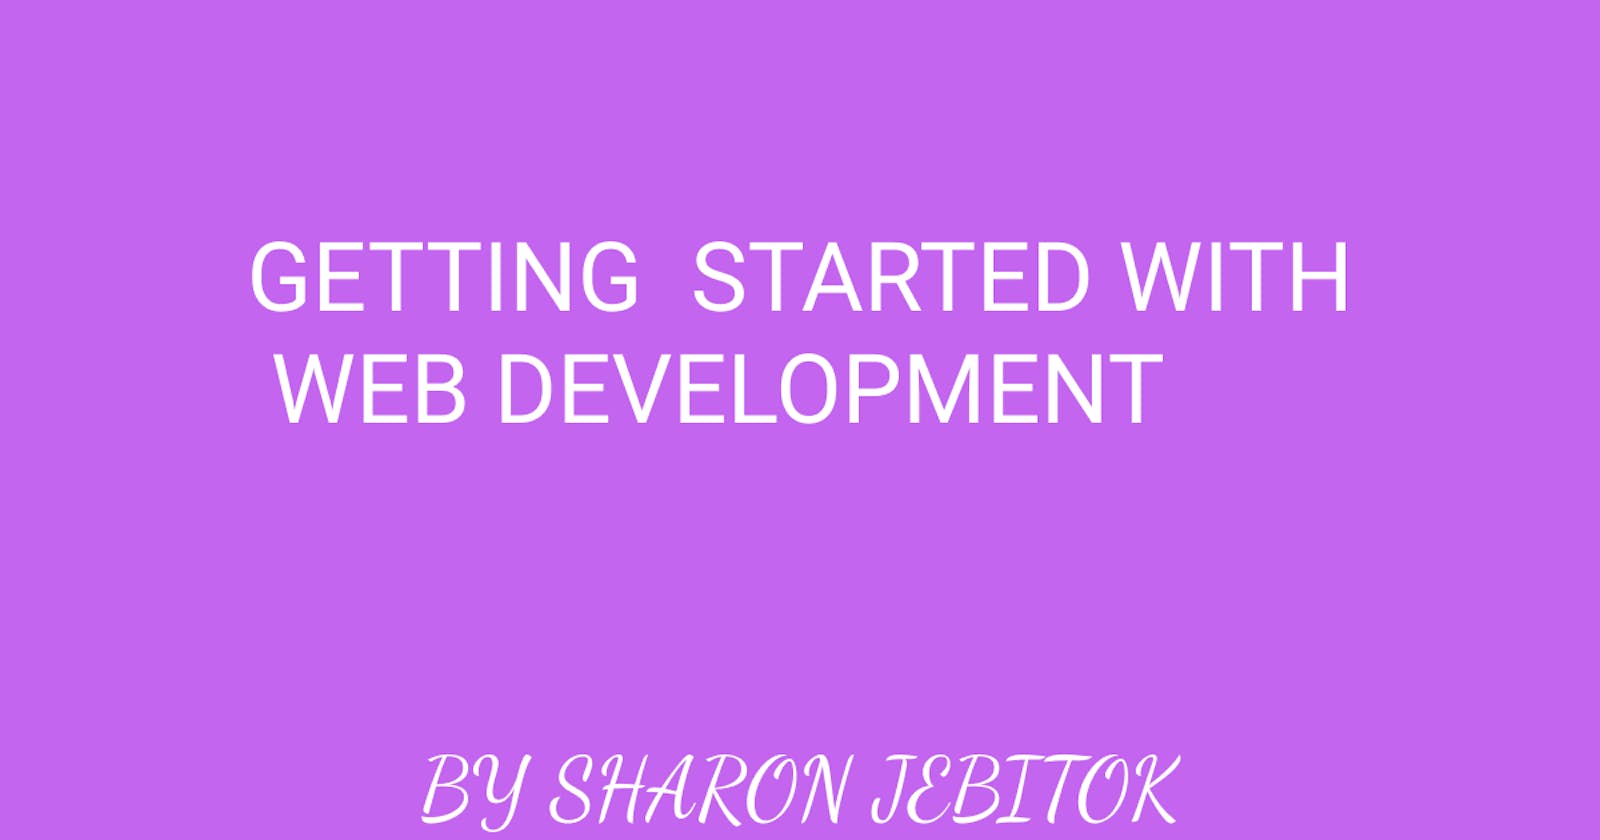 New to Development, All you need to get started with Web Development